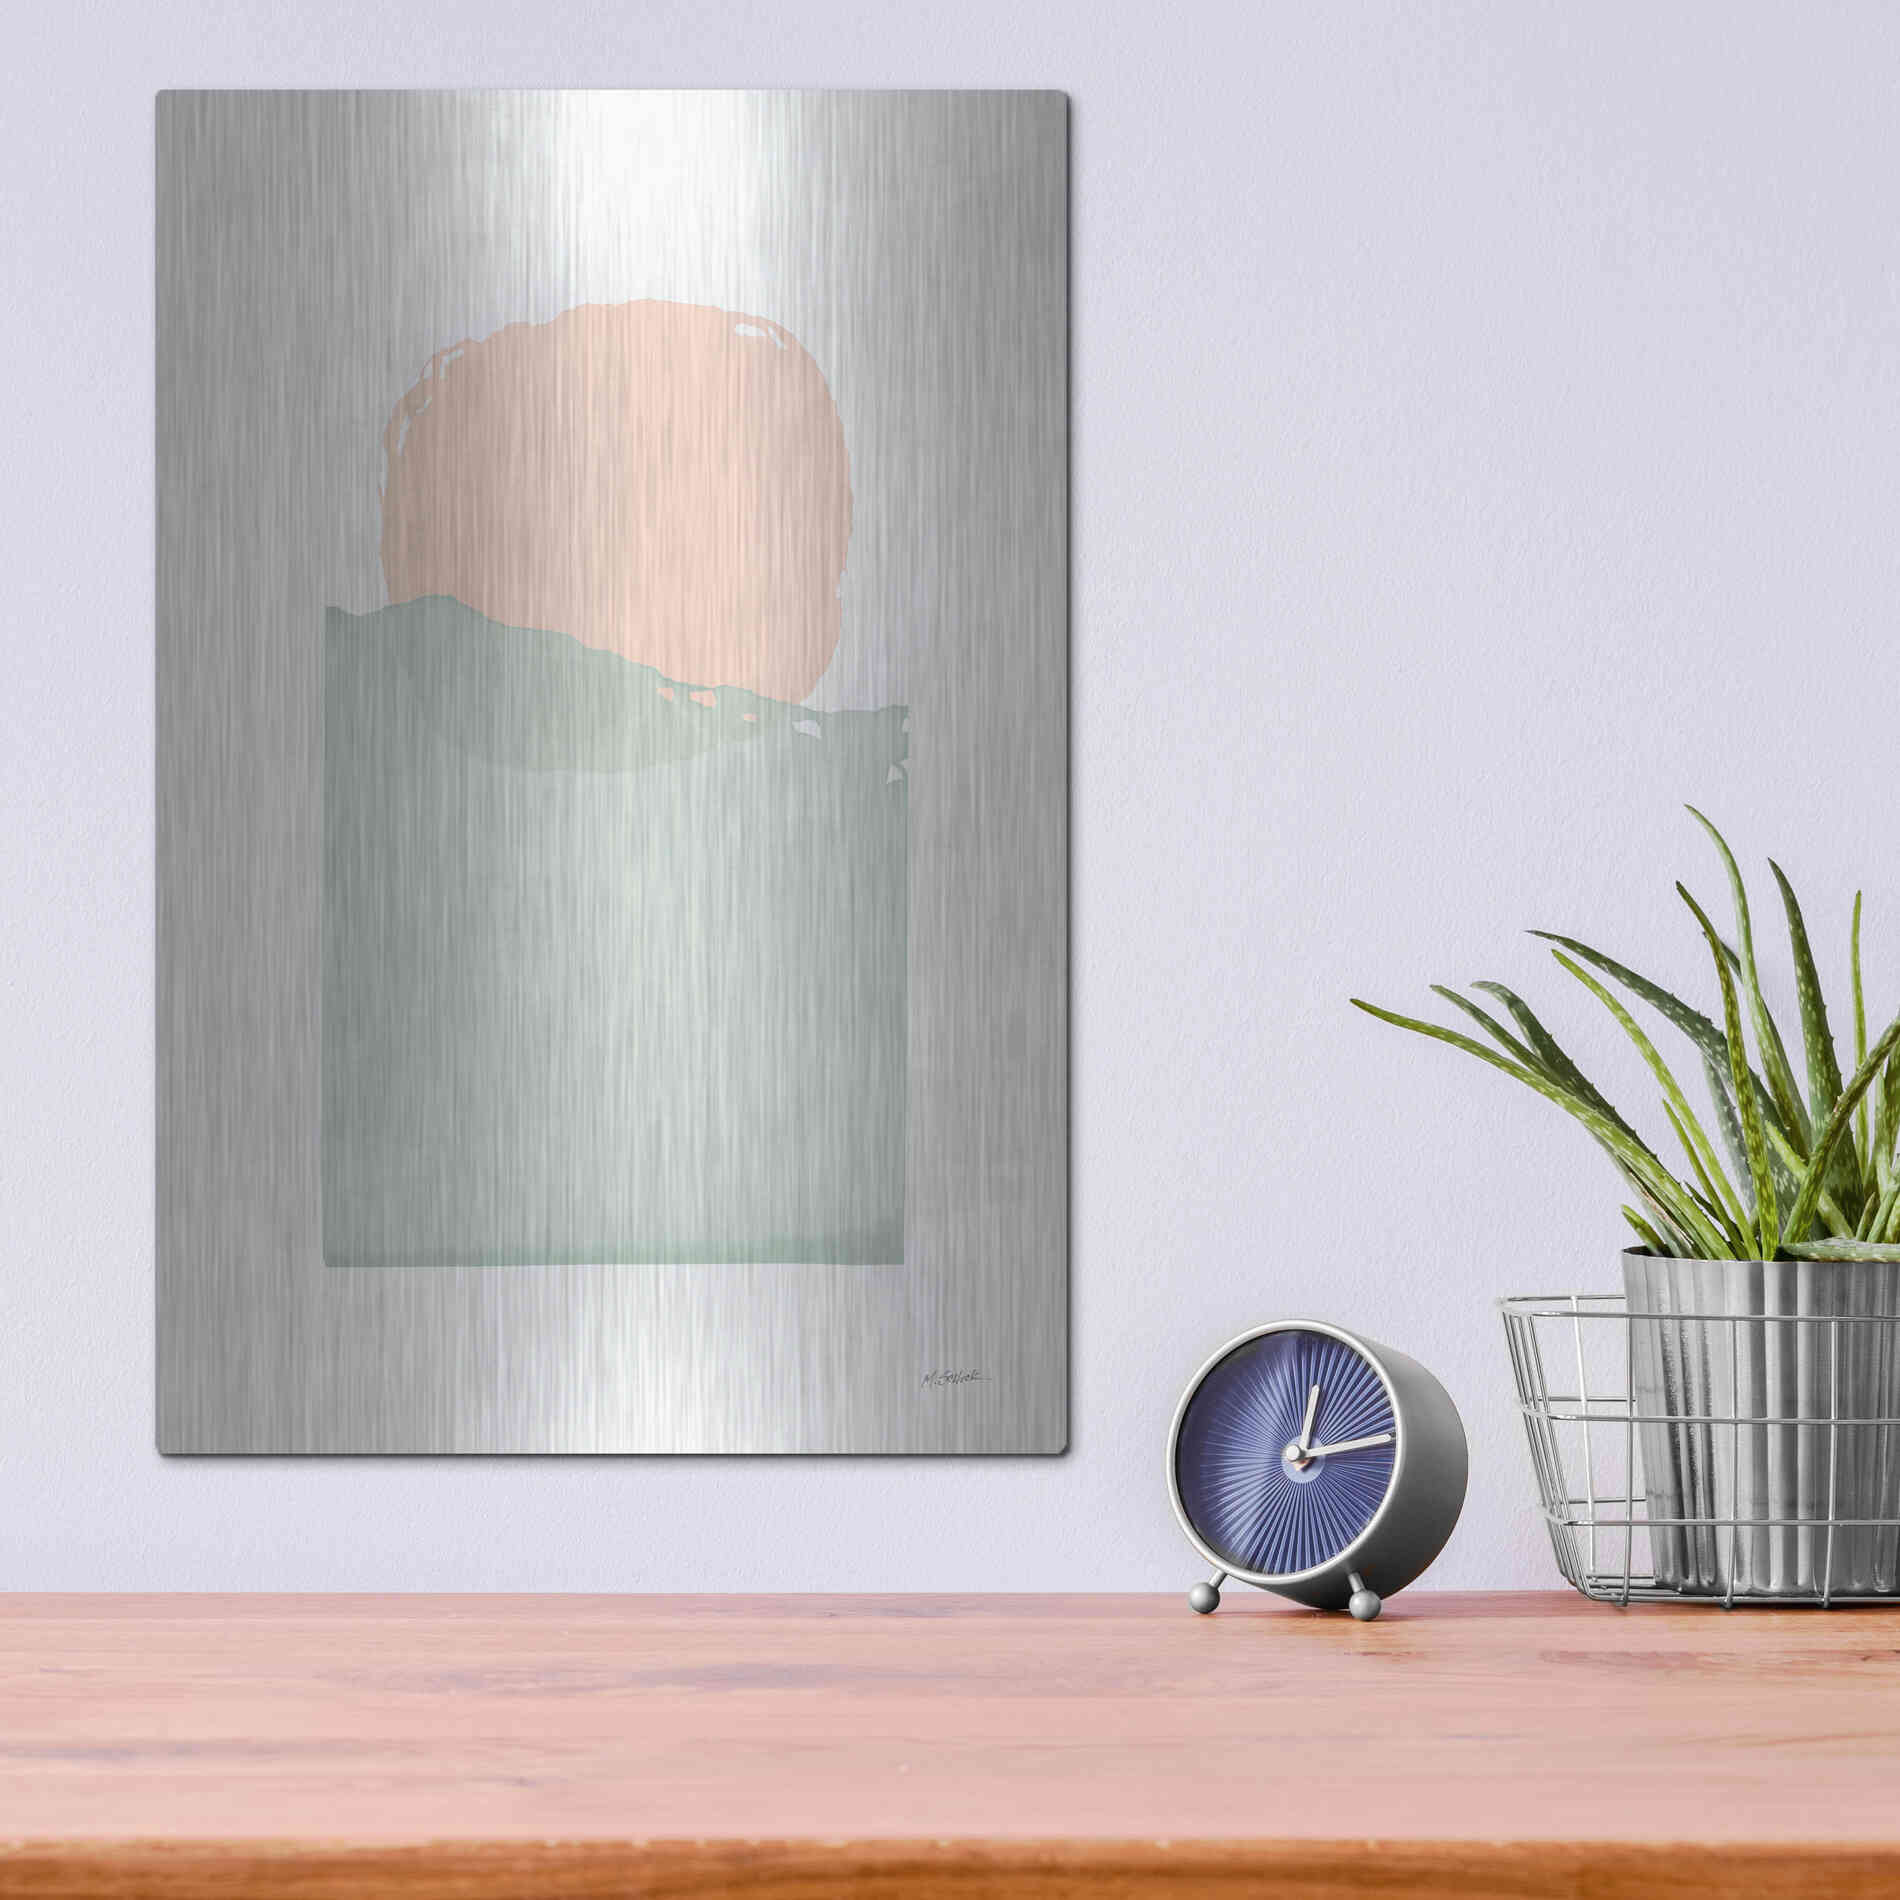 Luxe Metal Art 'Buoyant Pink And Green' by Mike Schick, Metal Wall Art,12x16